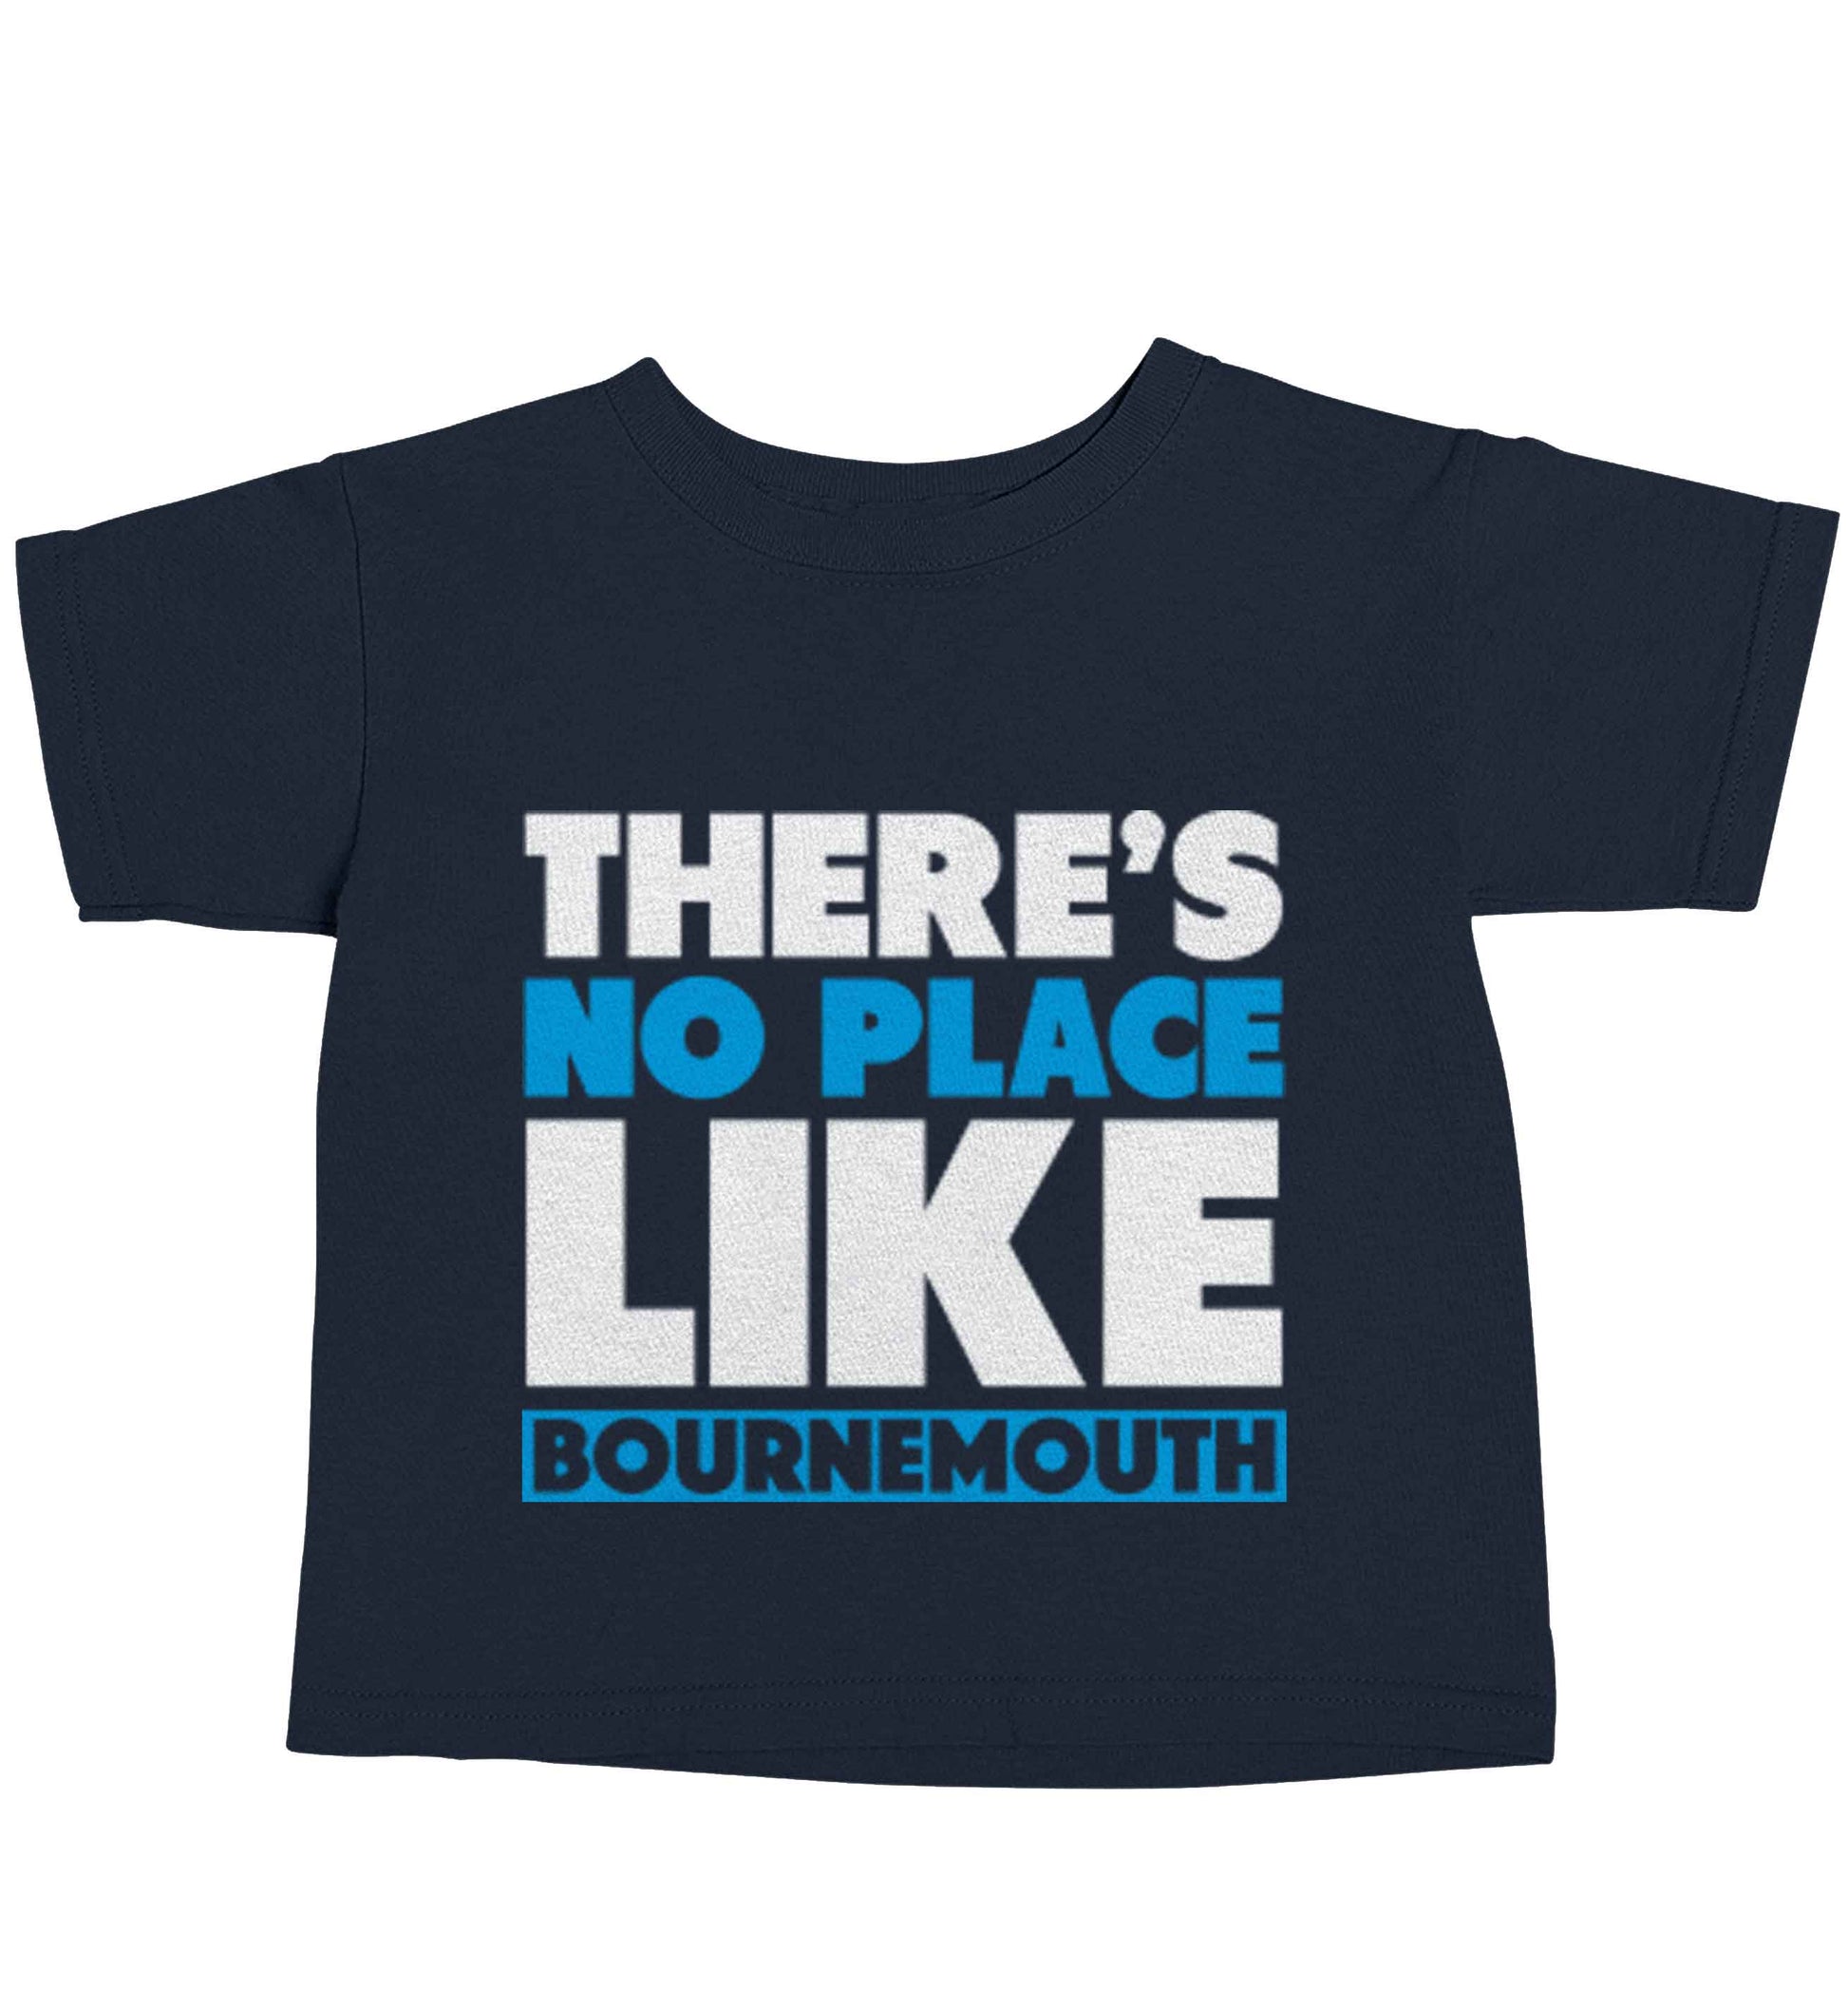 There's no place like Bournemouth navy baby toddler Tshirt 2 Years